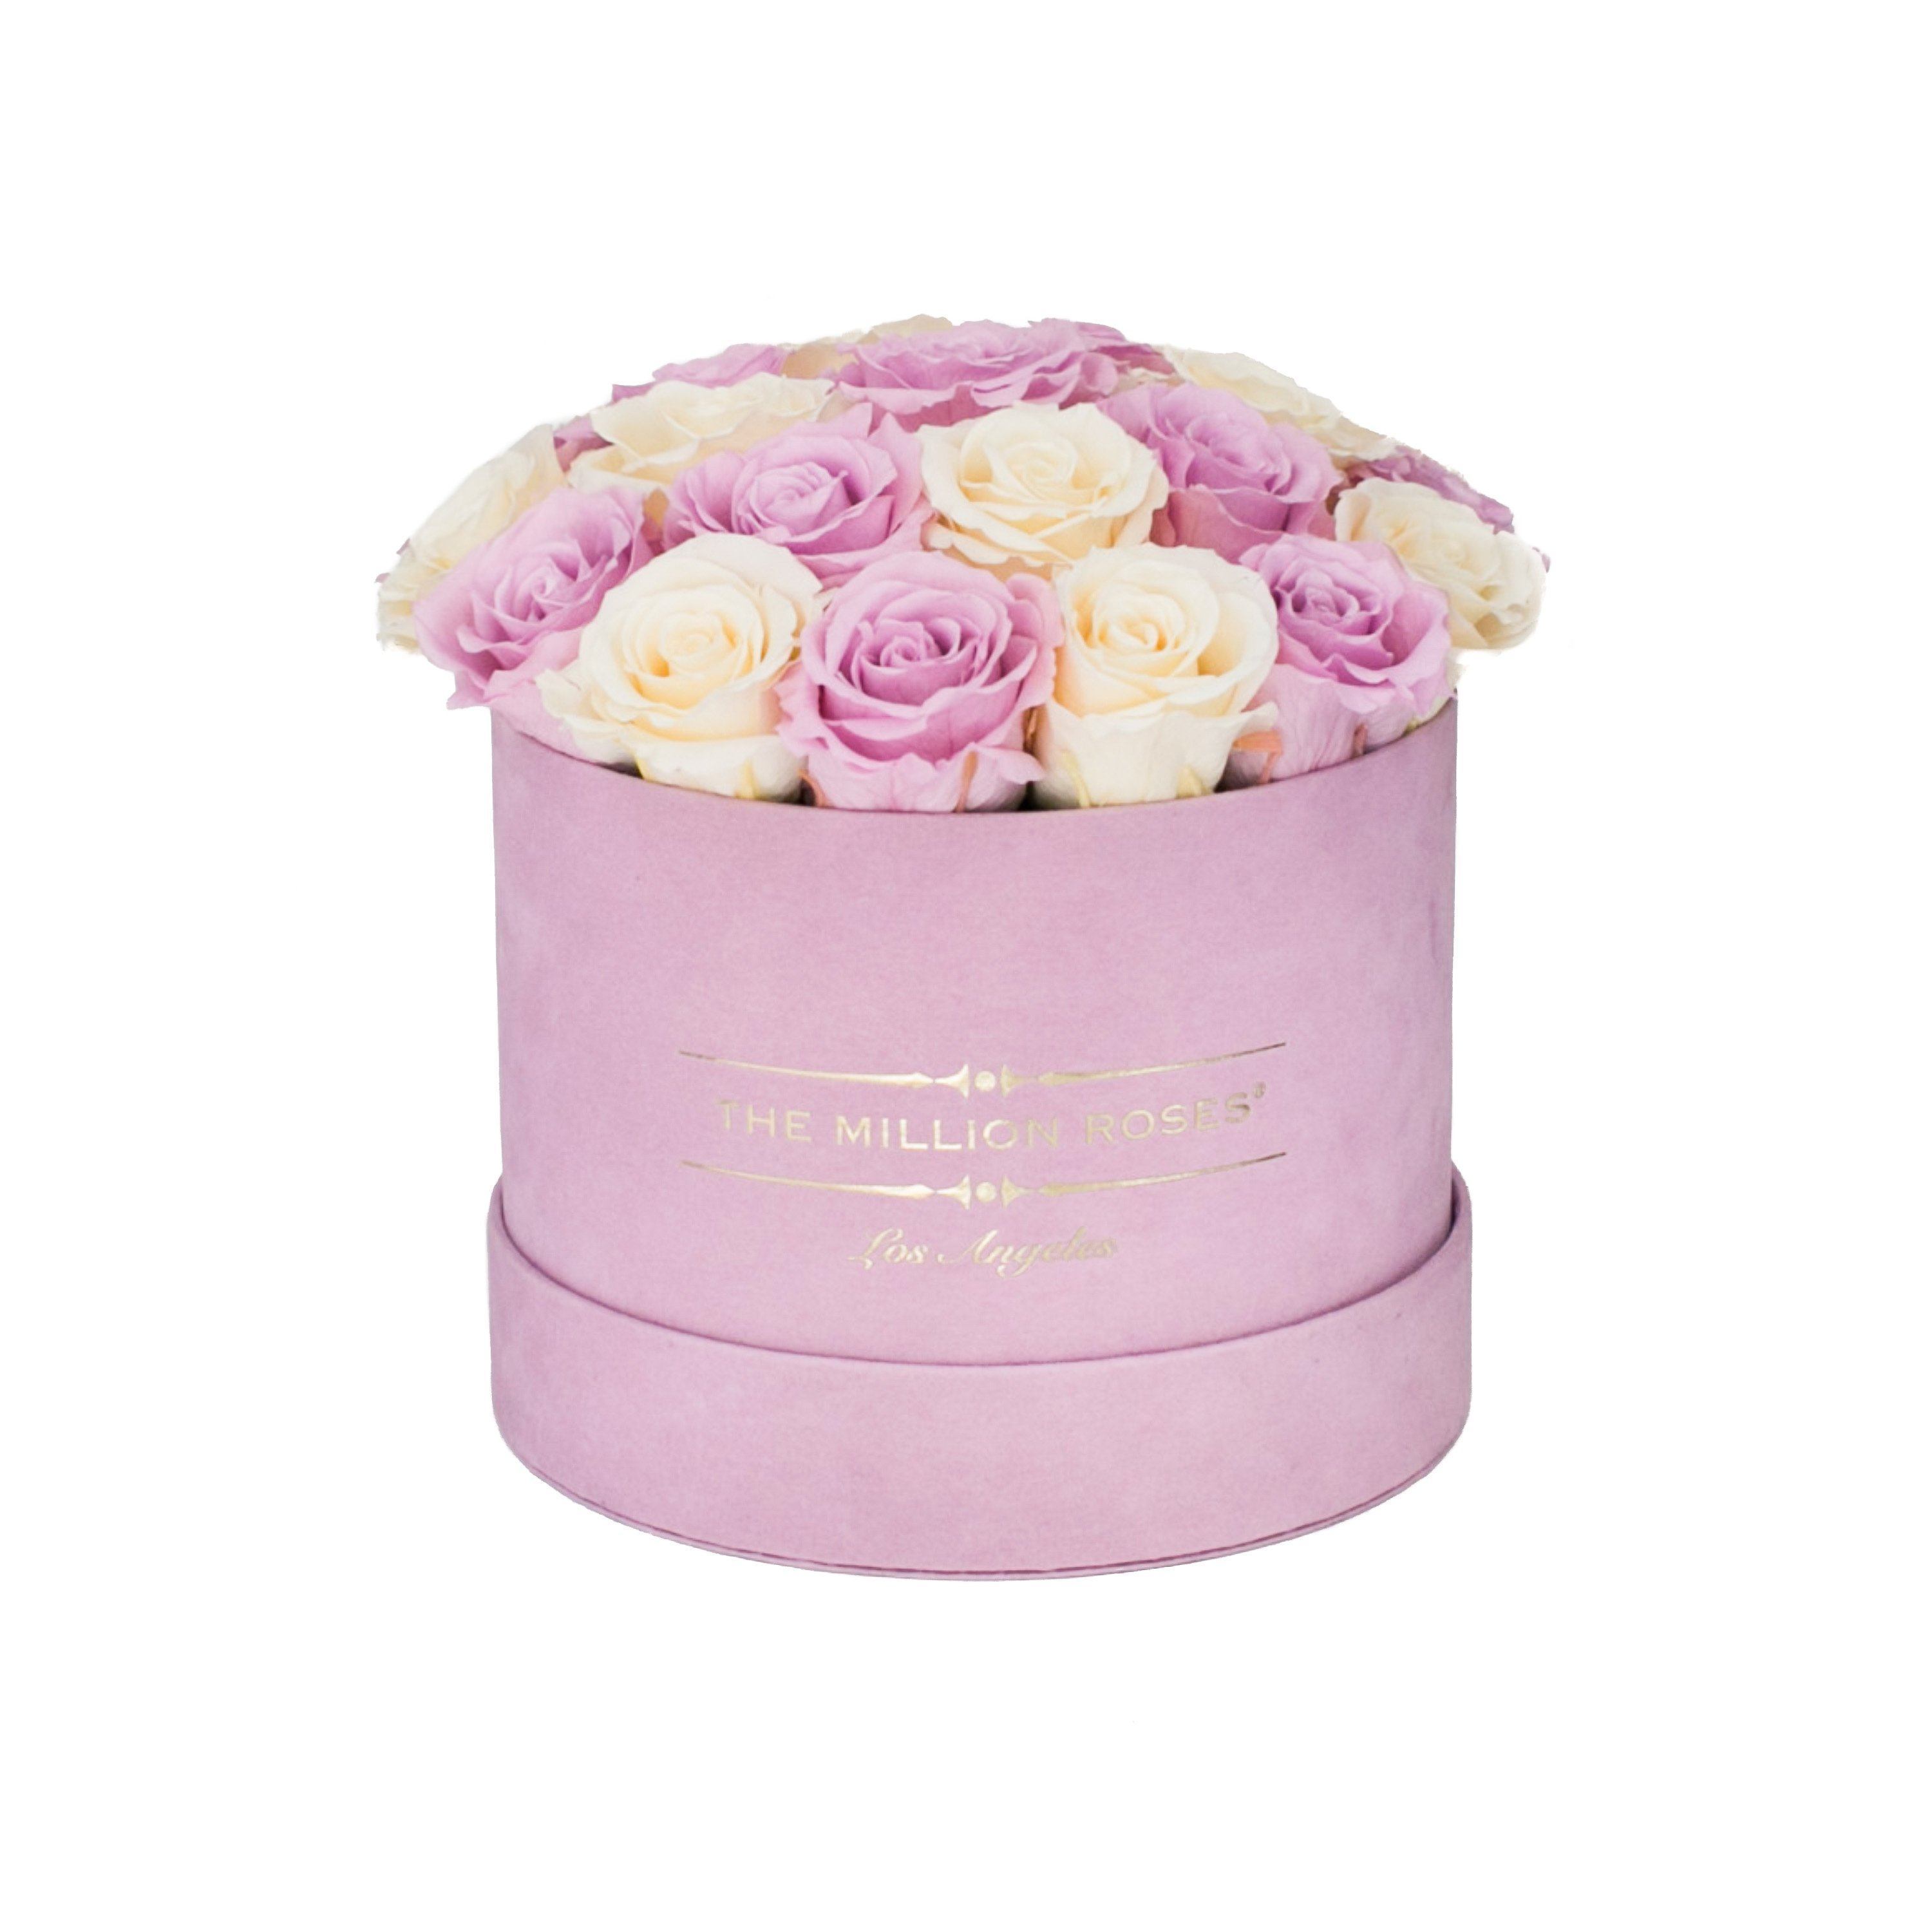 classic round box - light-pink suede box - white/pink roses pink eternity roses - the million roses